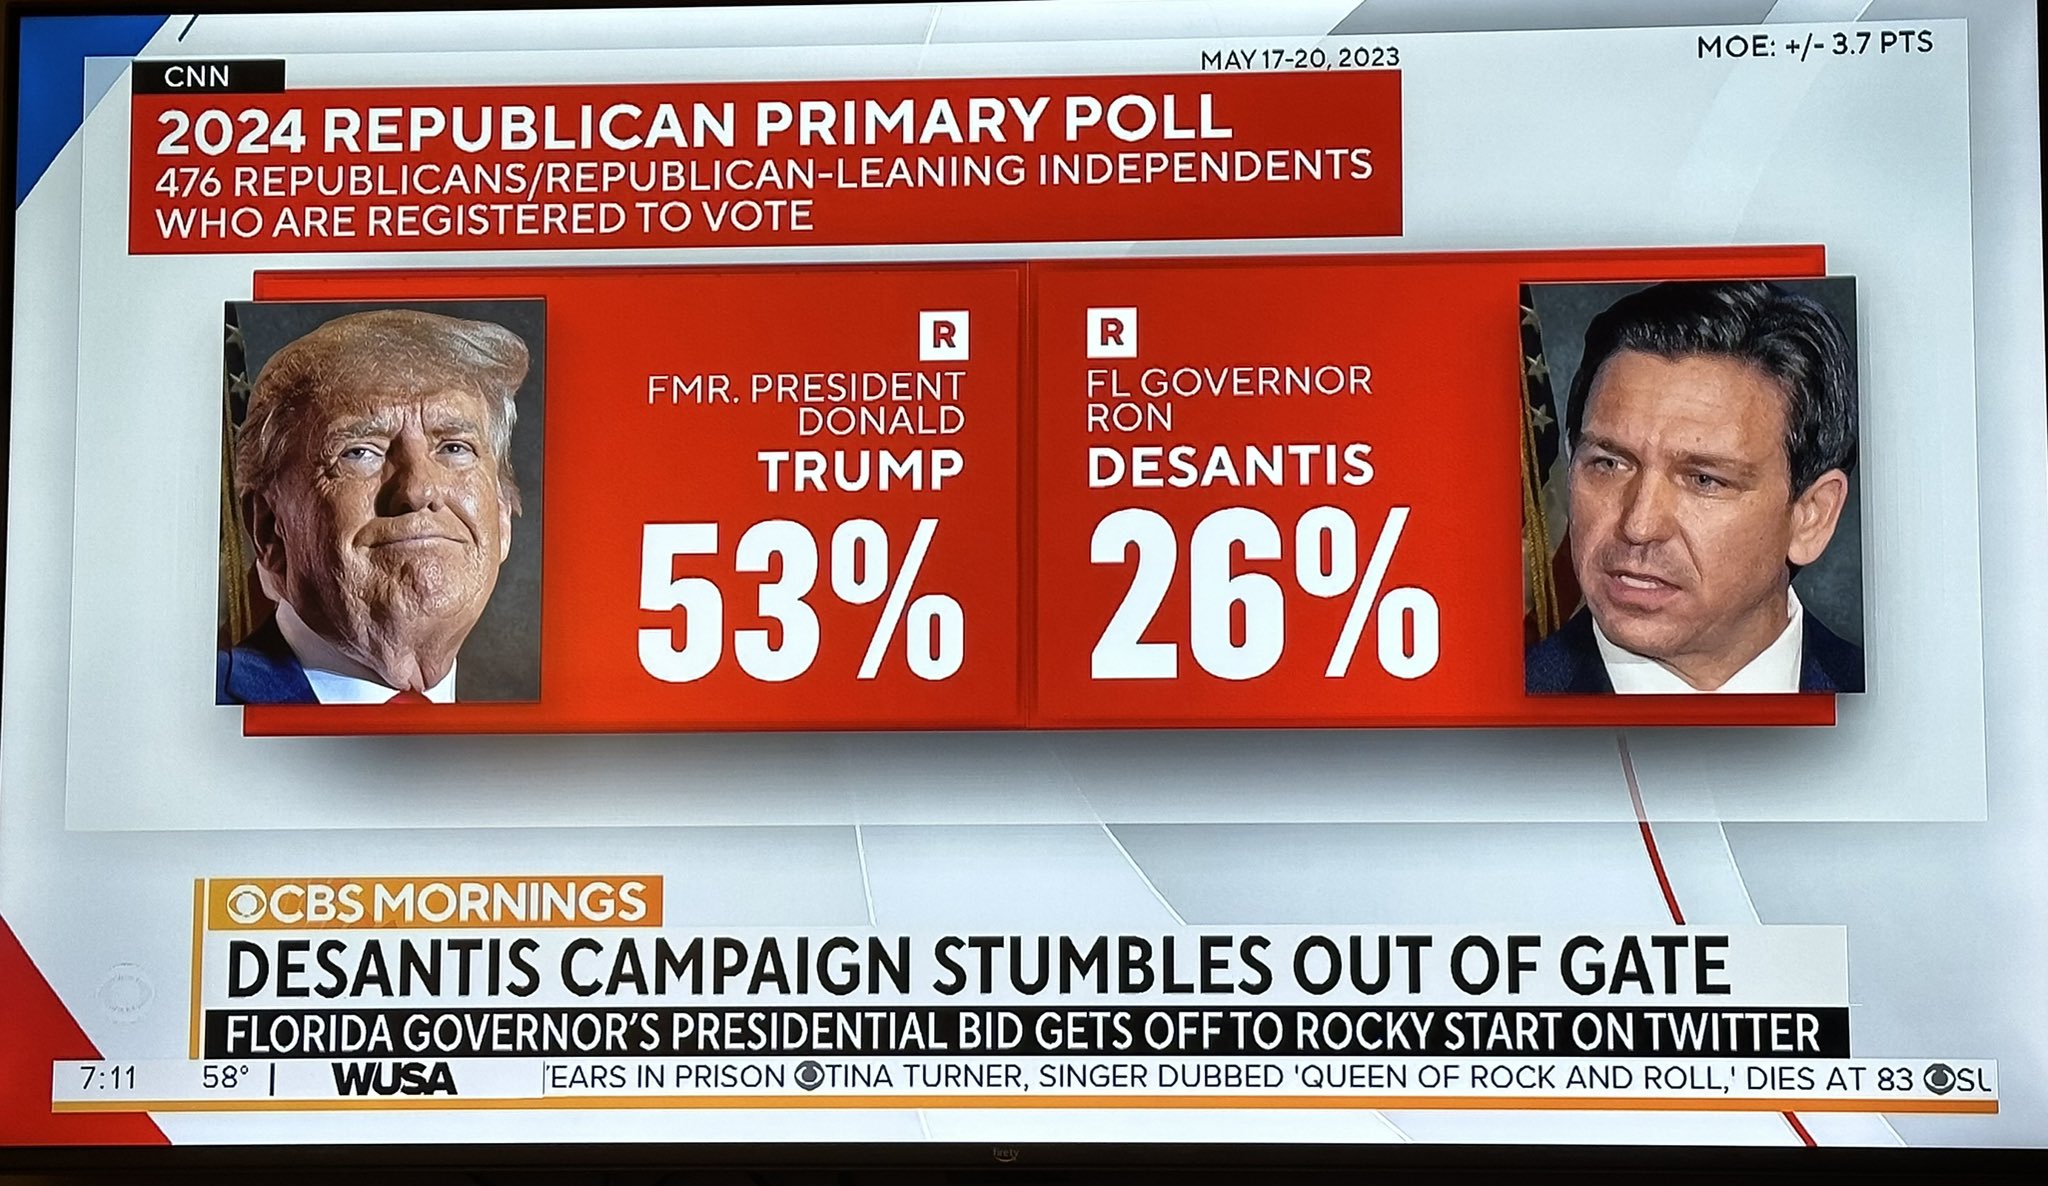 The US Election 2024 Republican Primary Poll Between Trump And DeSantis.jpg